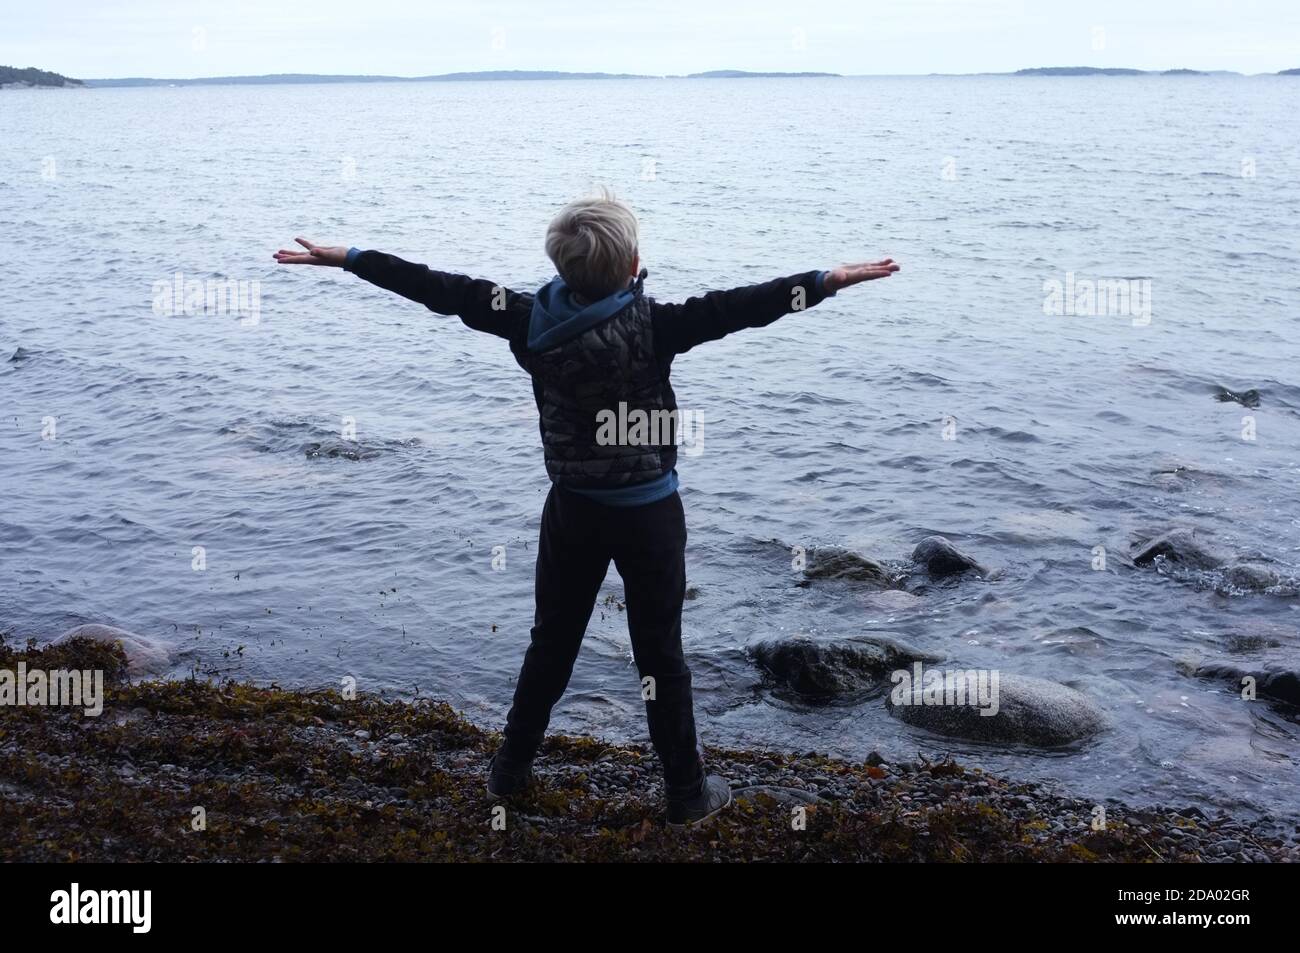 Blonde 7 year old boy in front of the water. Cherish the day! Open arms for the future. Stock Photo